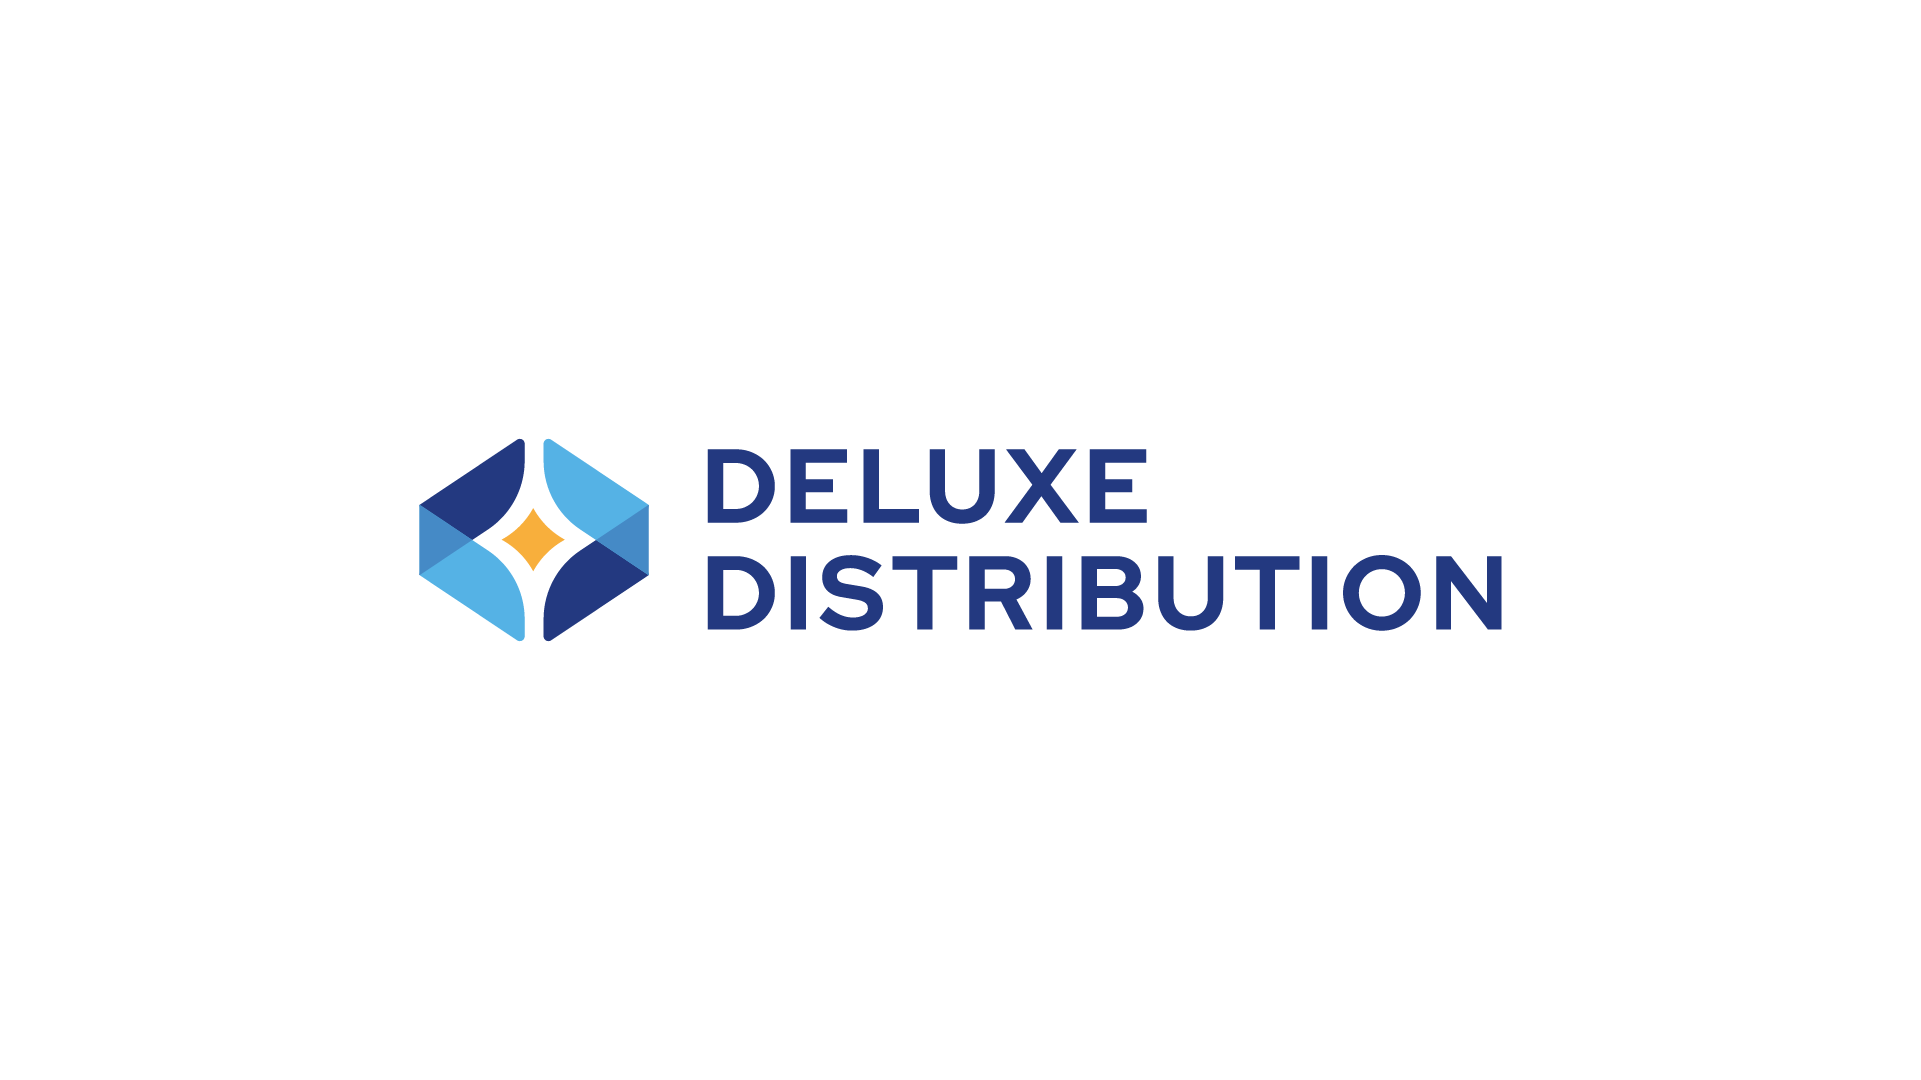 Deluxe Distribution - Wholesale Distributor logo, two mirrored letters 'D' with a star inside, symbolizing excellence and wholesale distribution